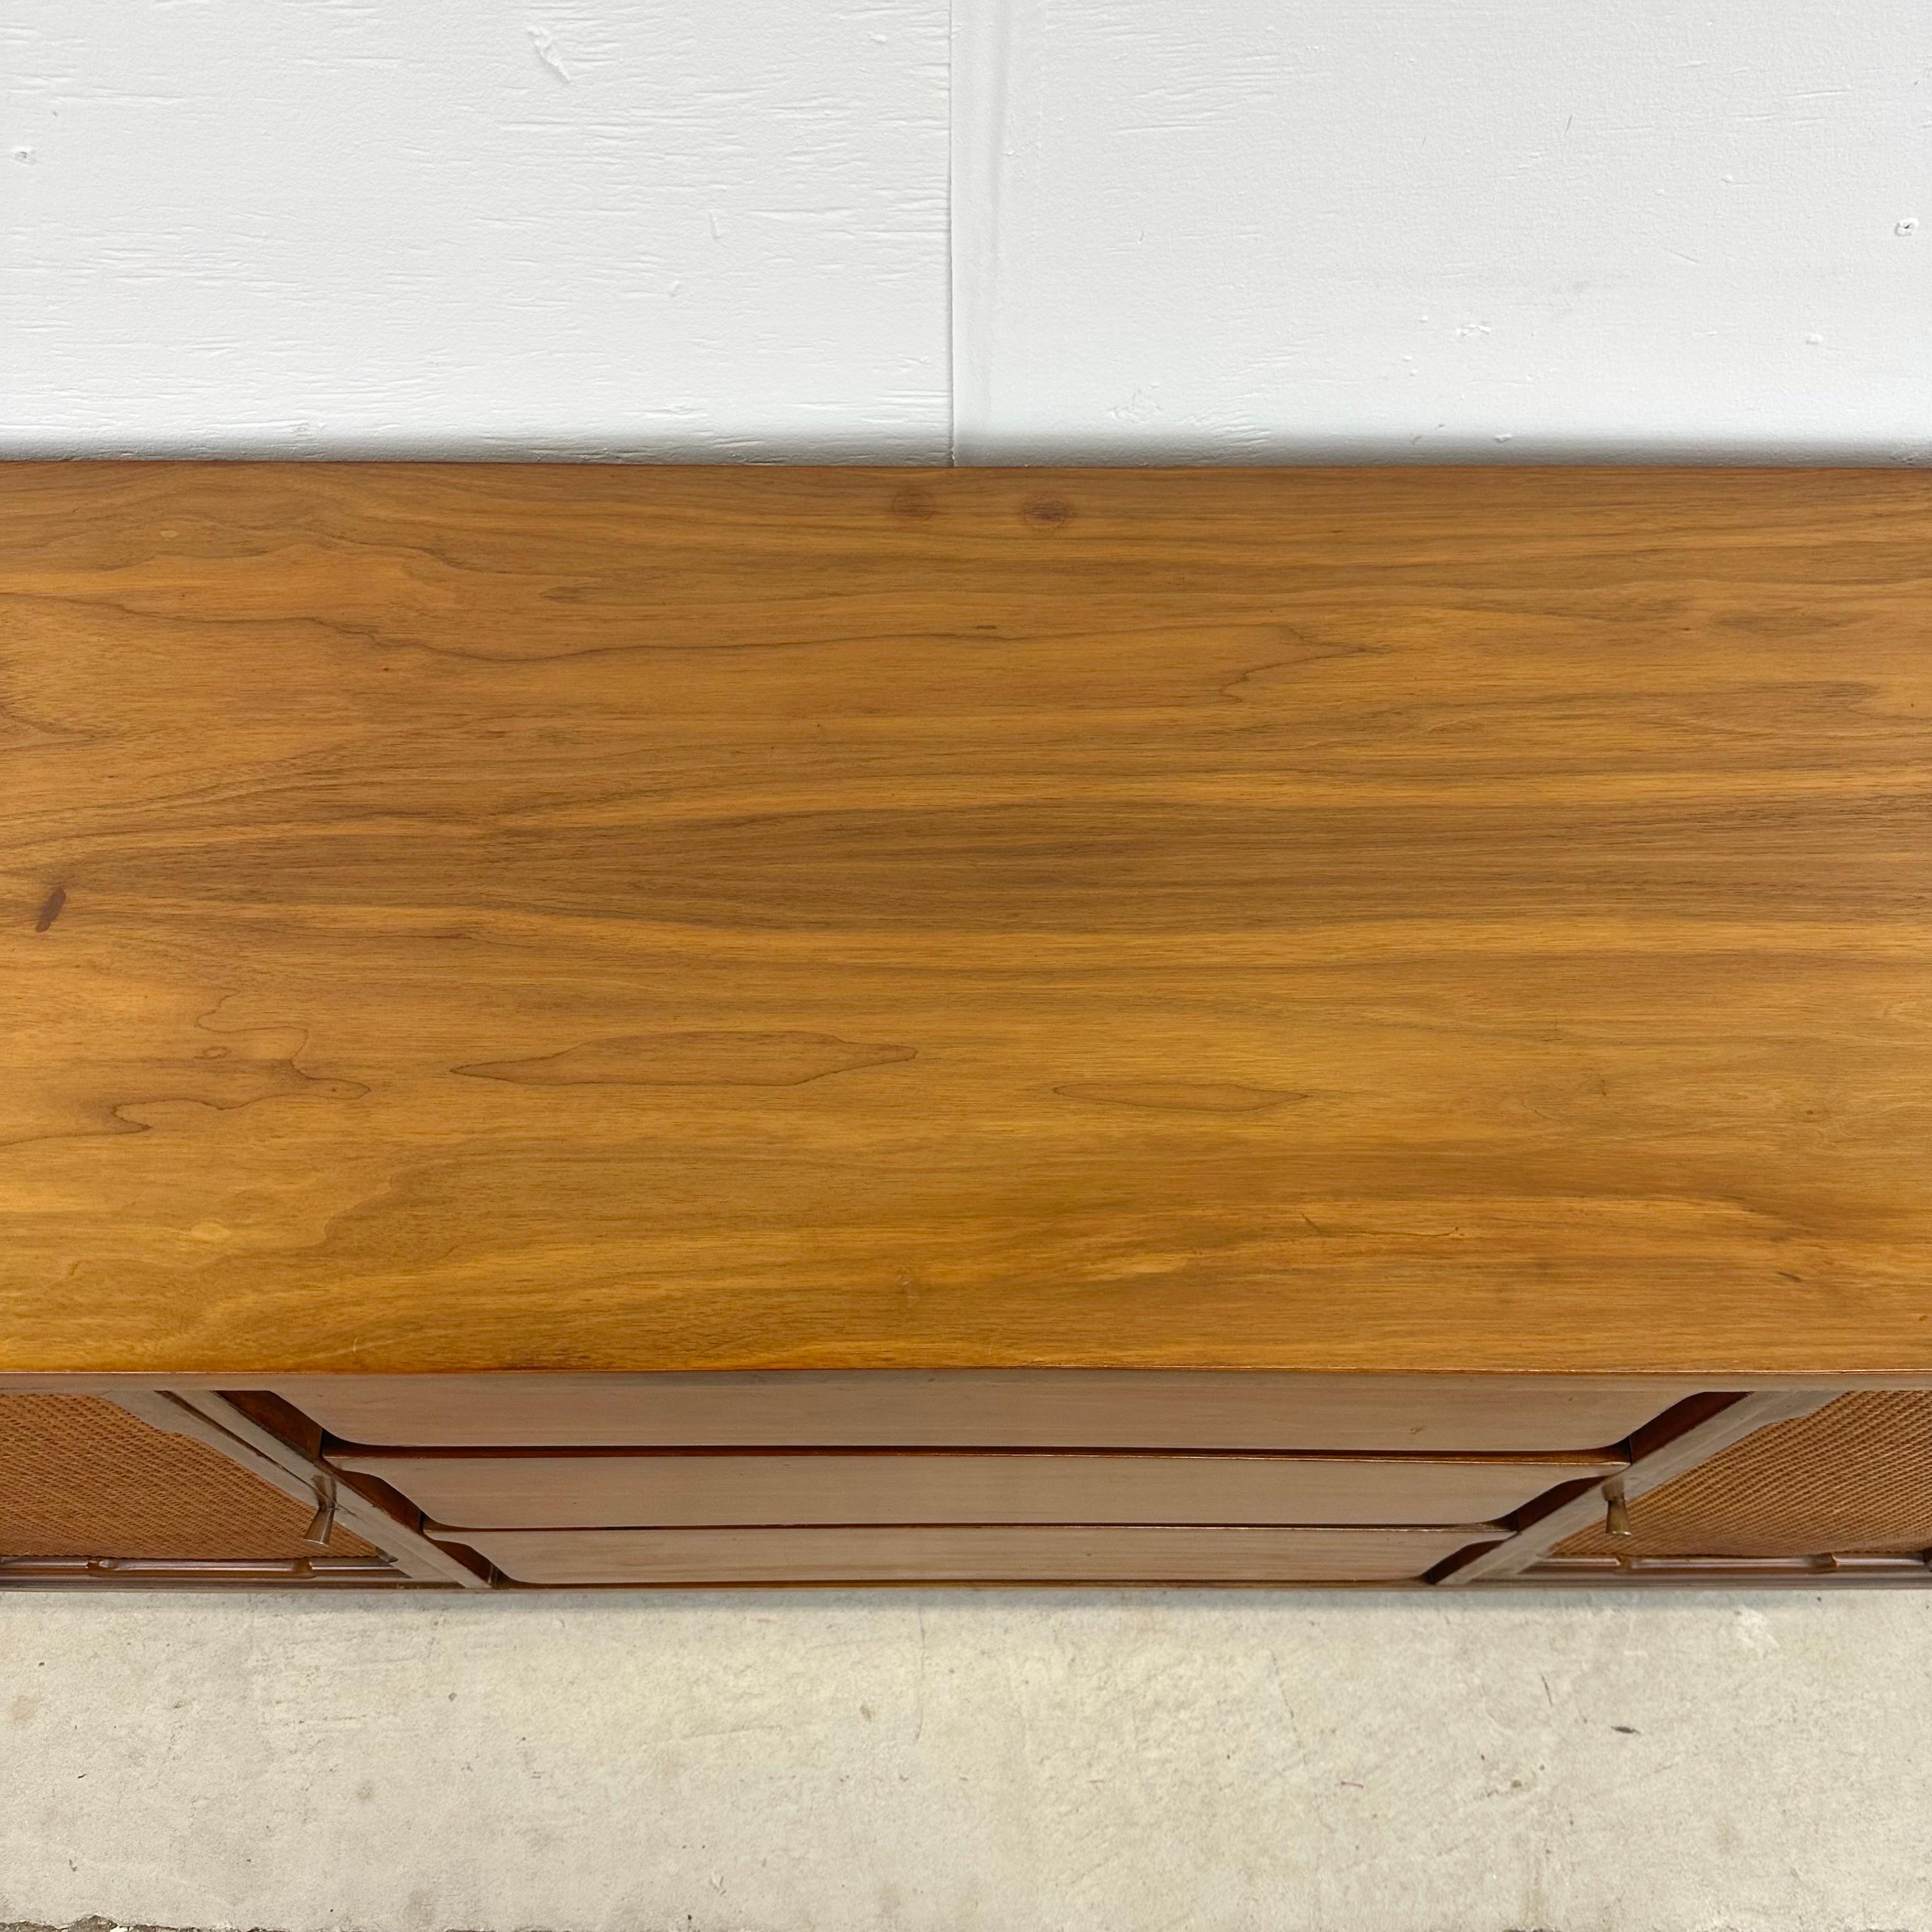 20th Century Mid-Century Sideboard or Credenza With Cane Front Doors